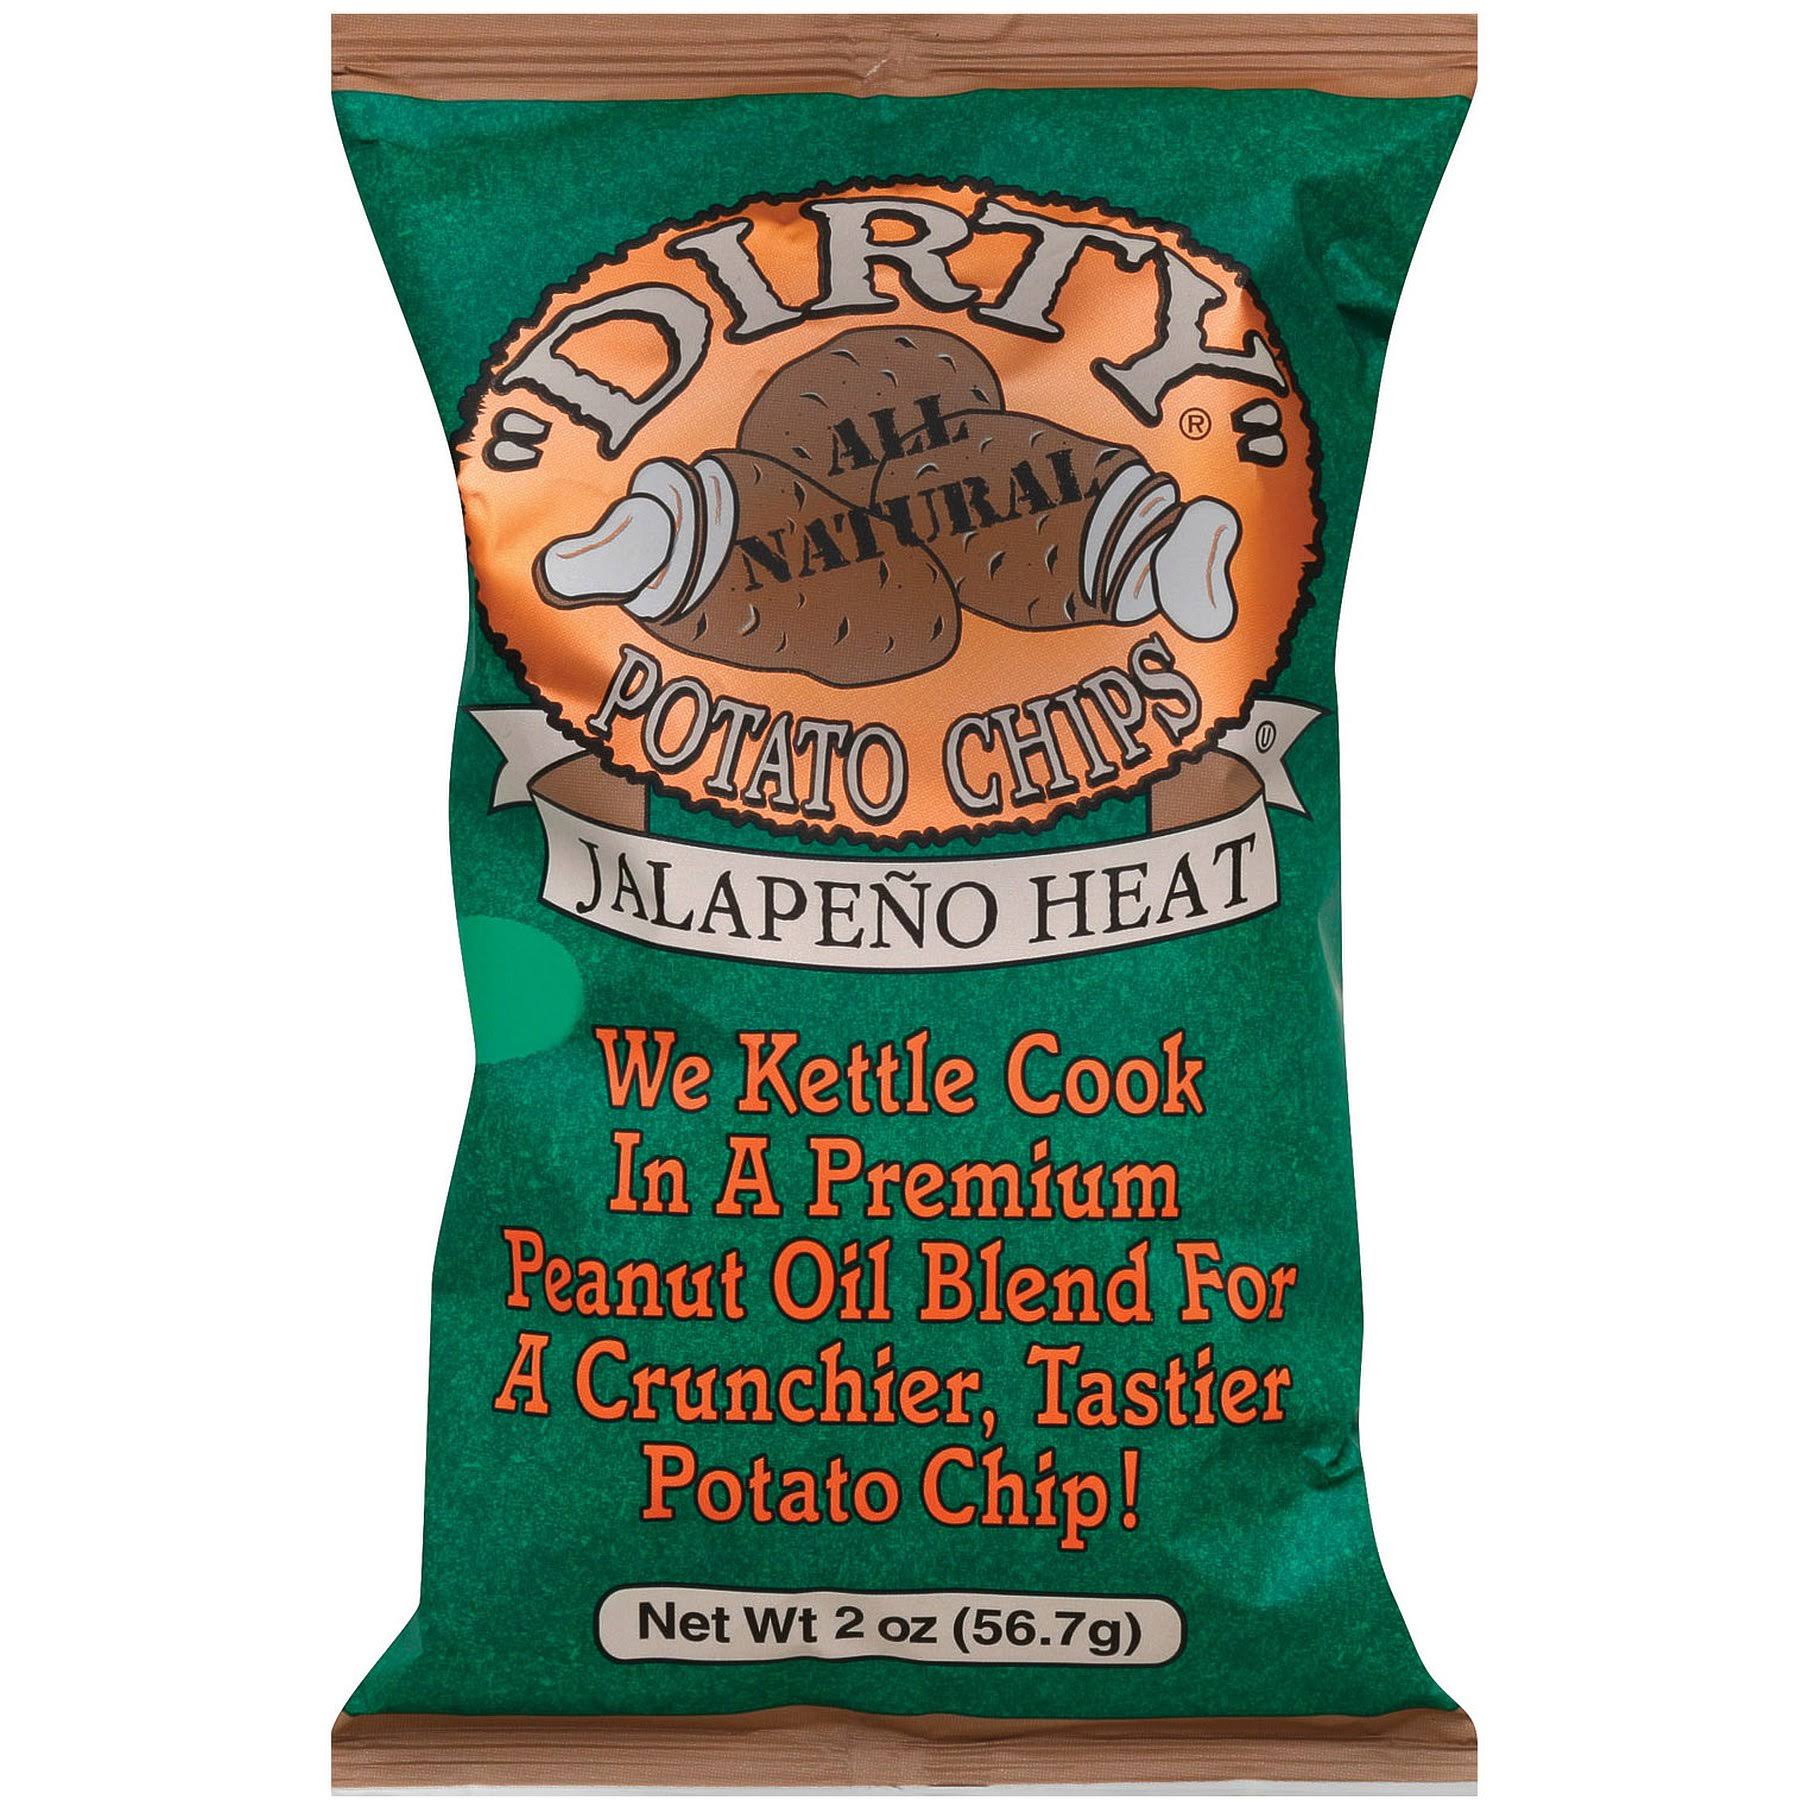 Dirty Chips - Jalapeno Heat - Case Of 25 - 2 Oz